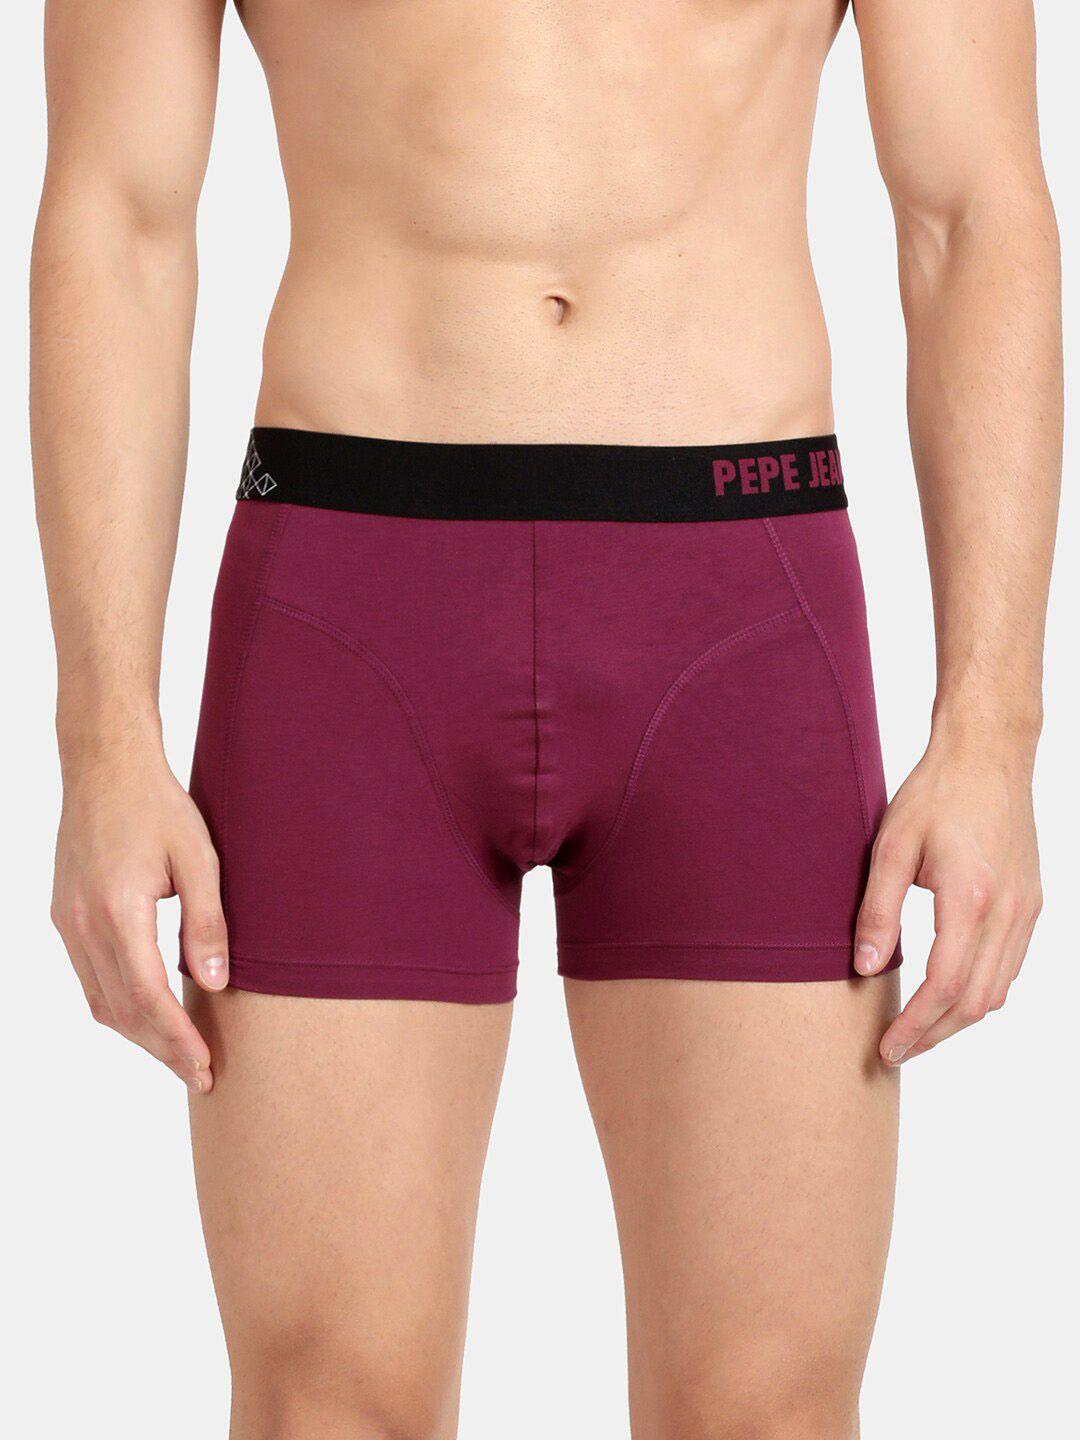 pepe-jeans-men-magenta-purple-solid-comfort-fit-mid-rise-no-marks-stretchable-trunk-opt03